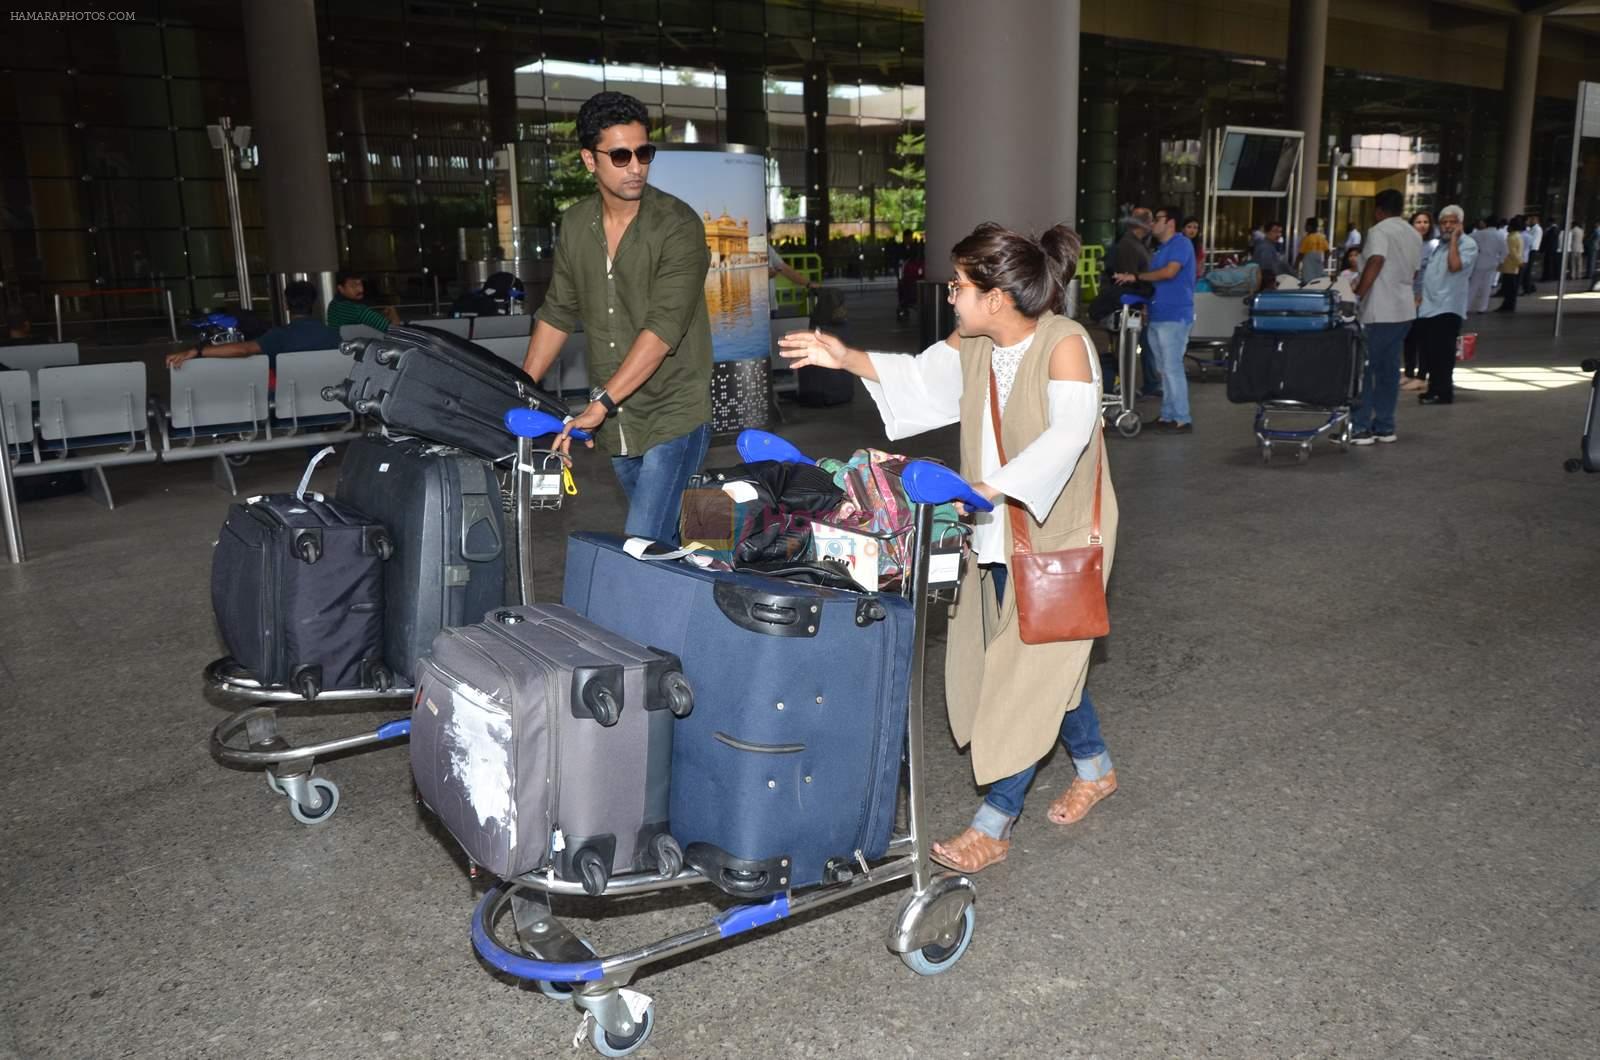 Richa Chadda snapped with her film team of Massan back from Cannes on 25th May 2015